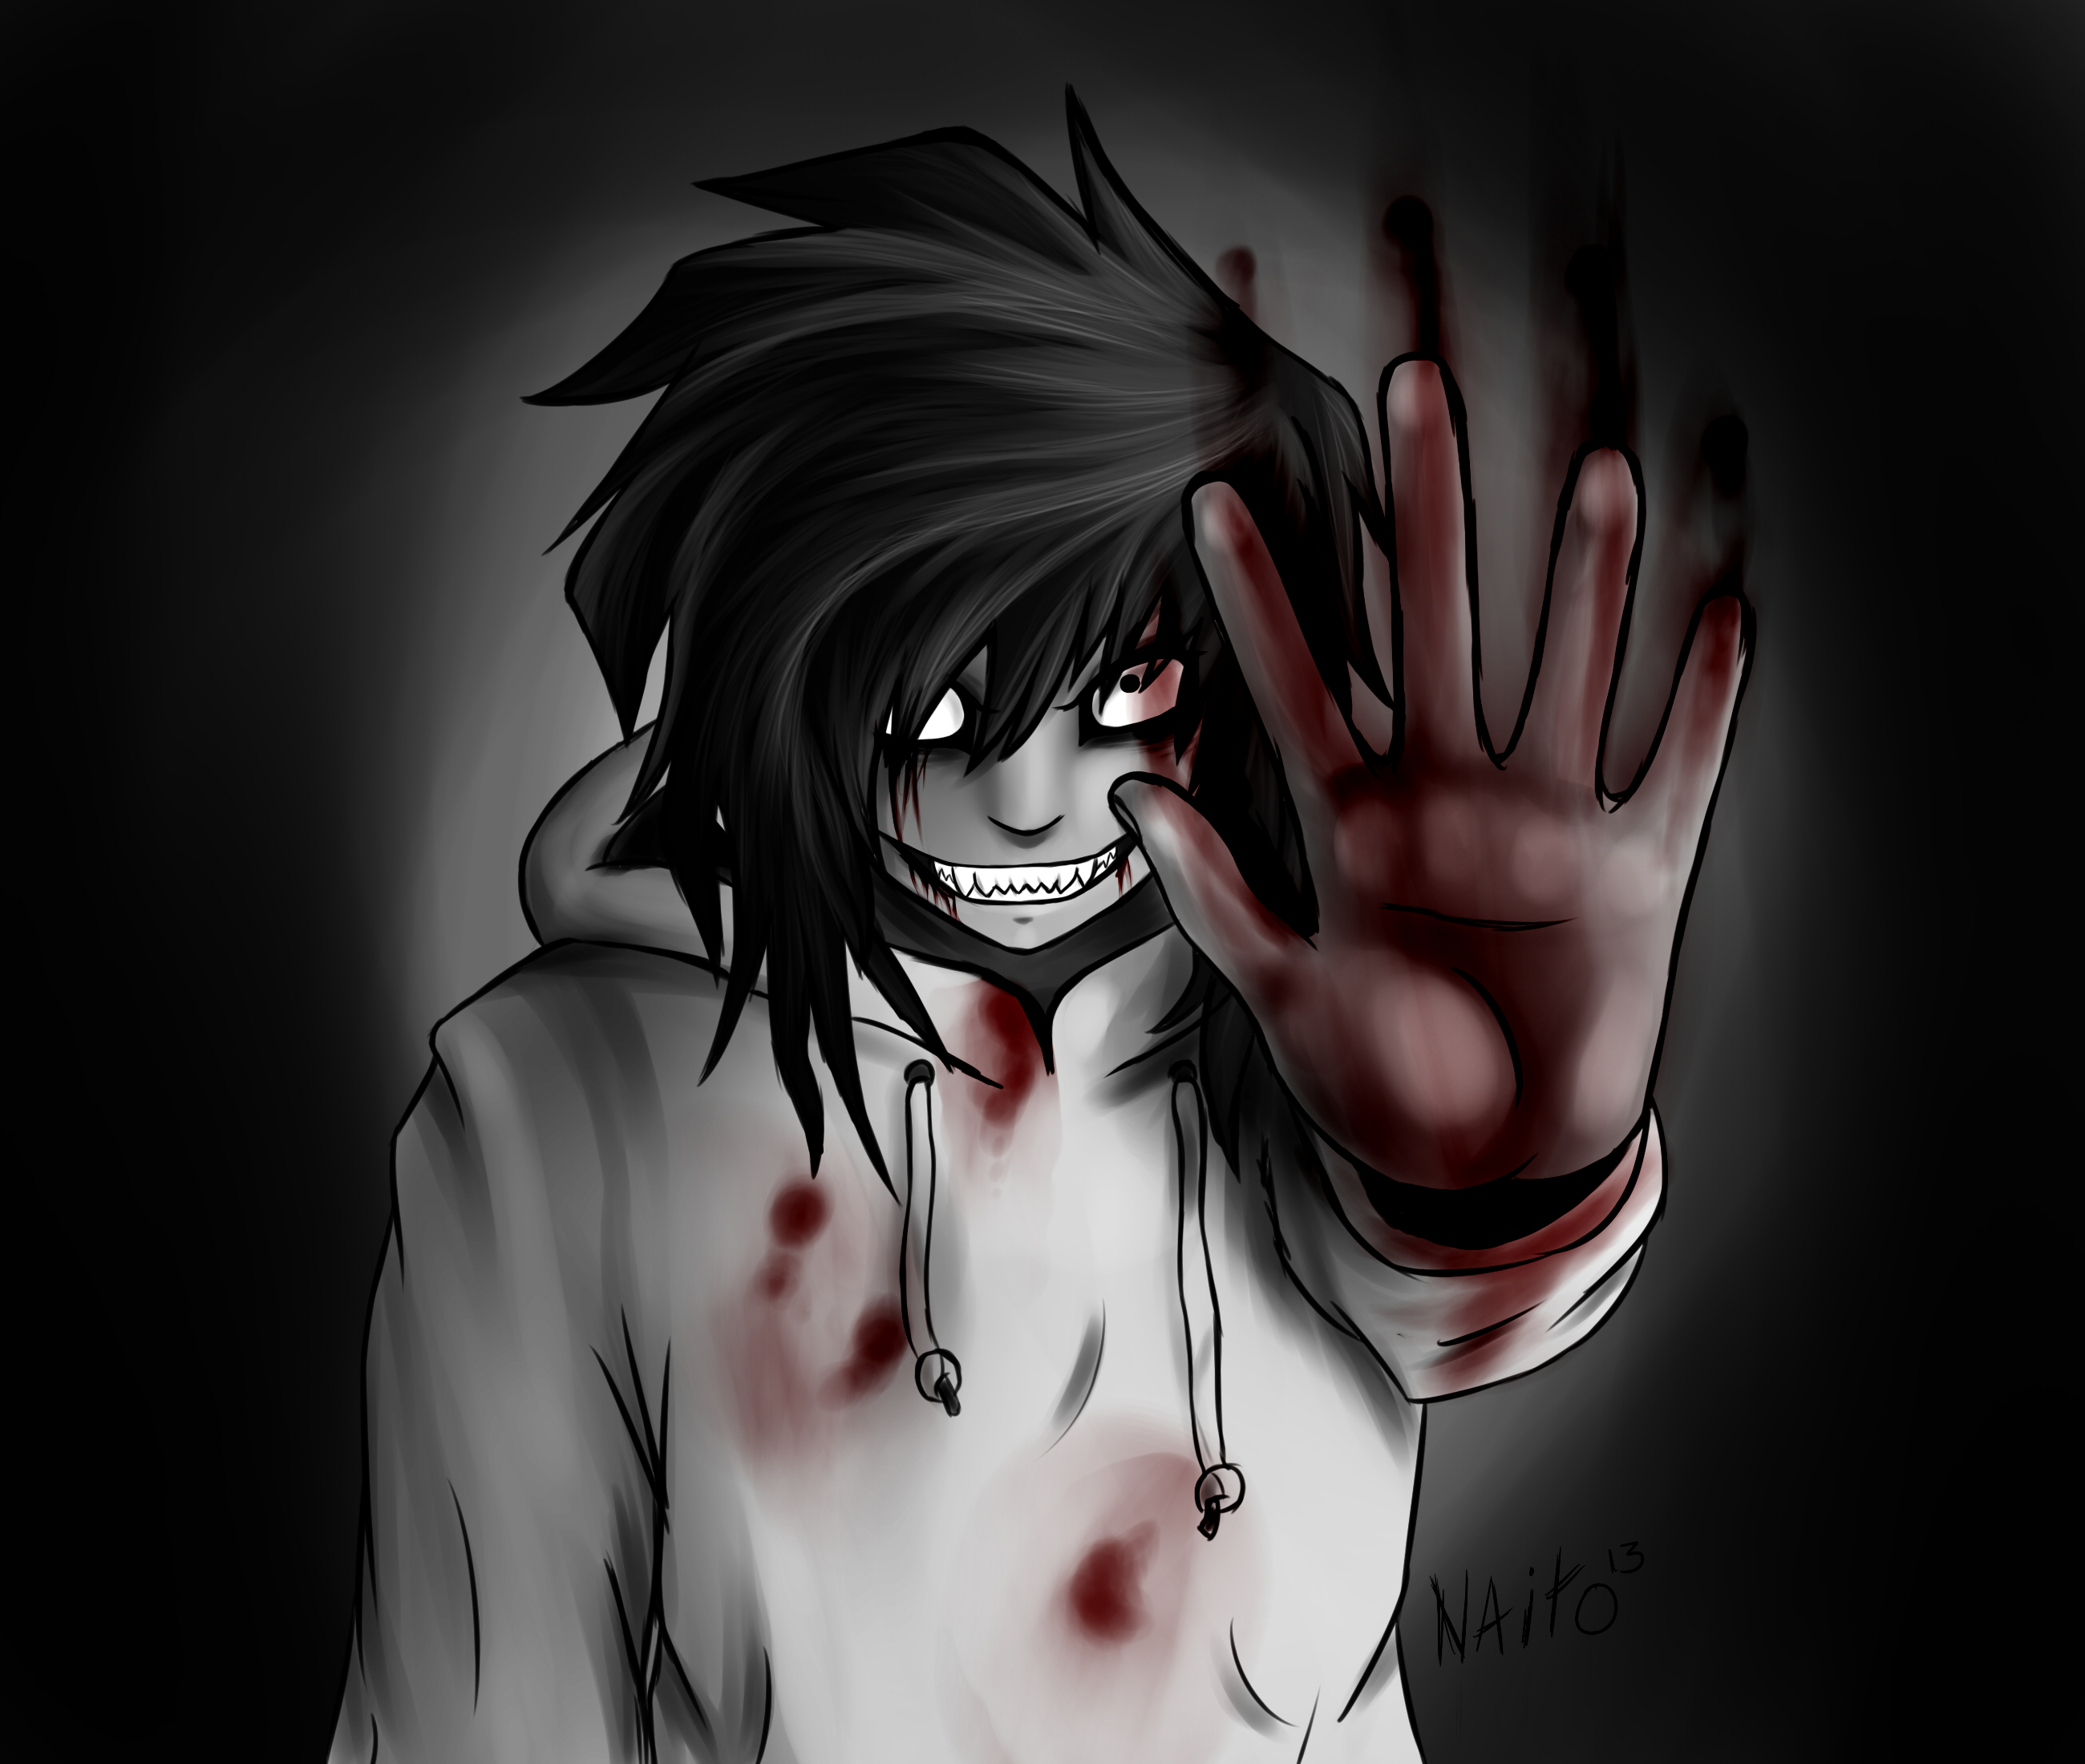 Are Jeff the Killer and Slenderman real? - Quora